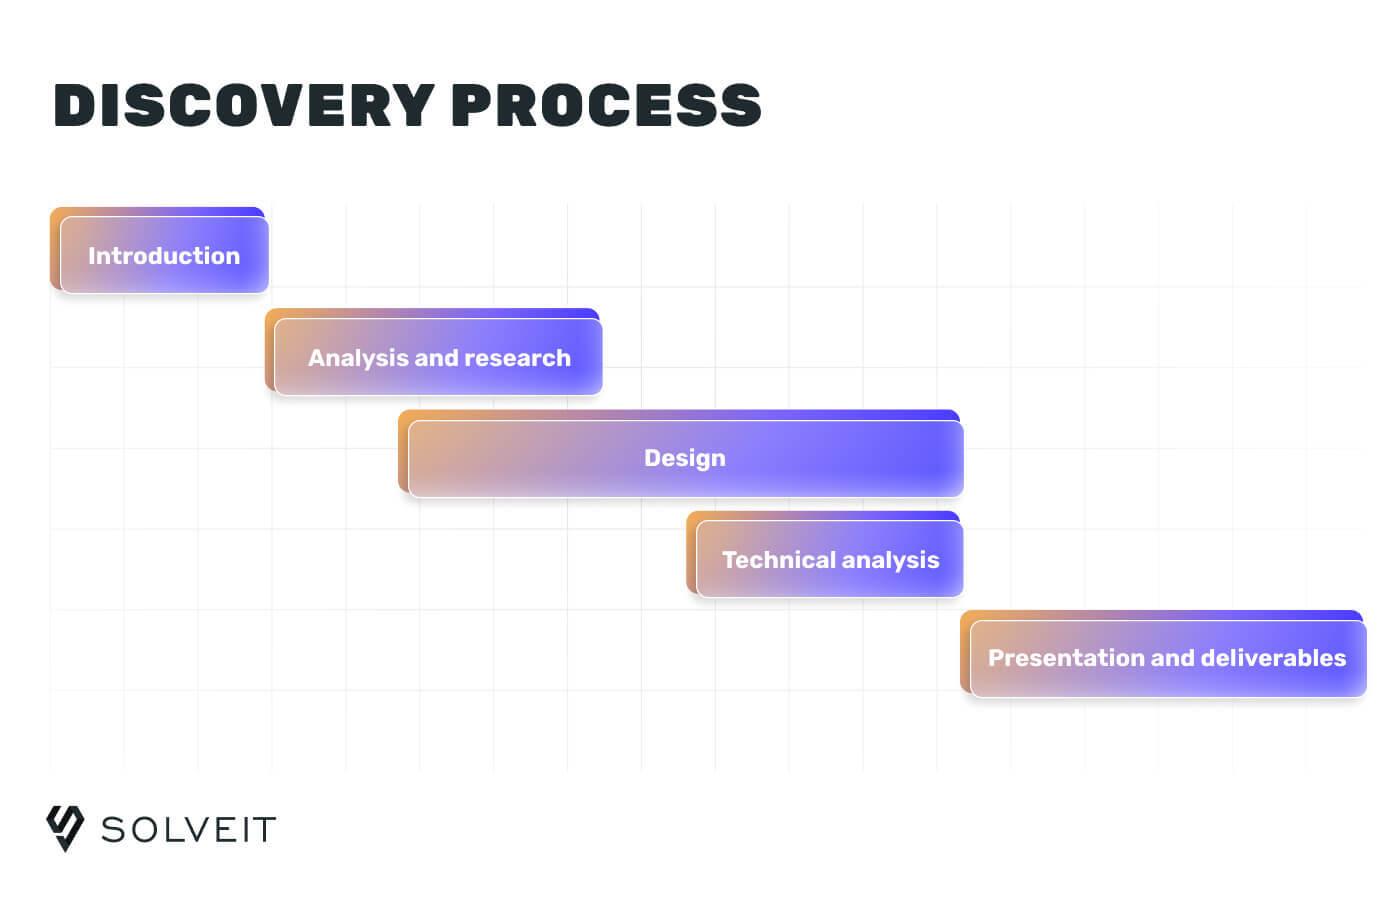 Discovery phase steps